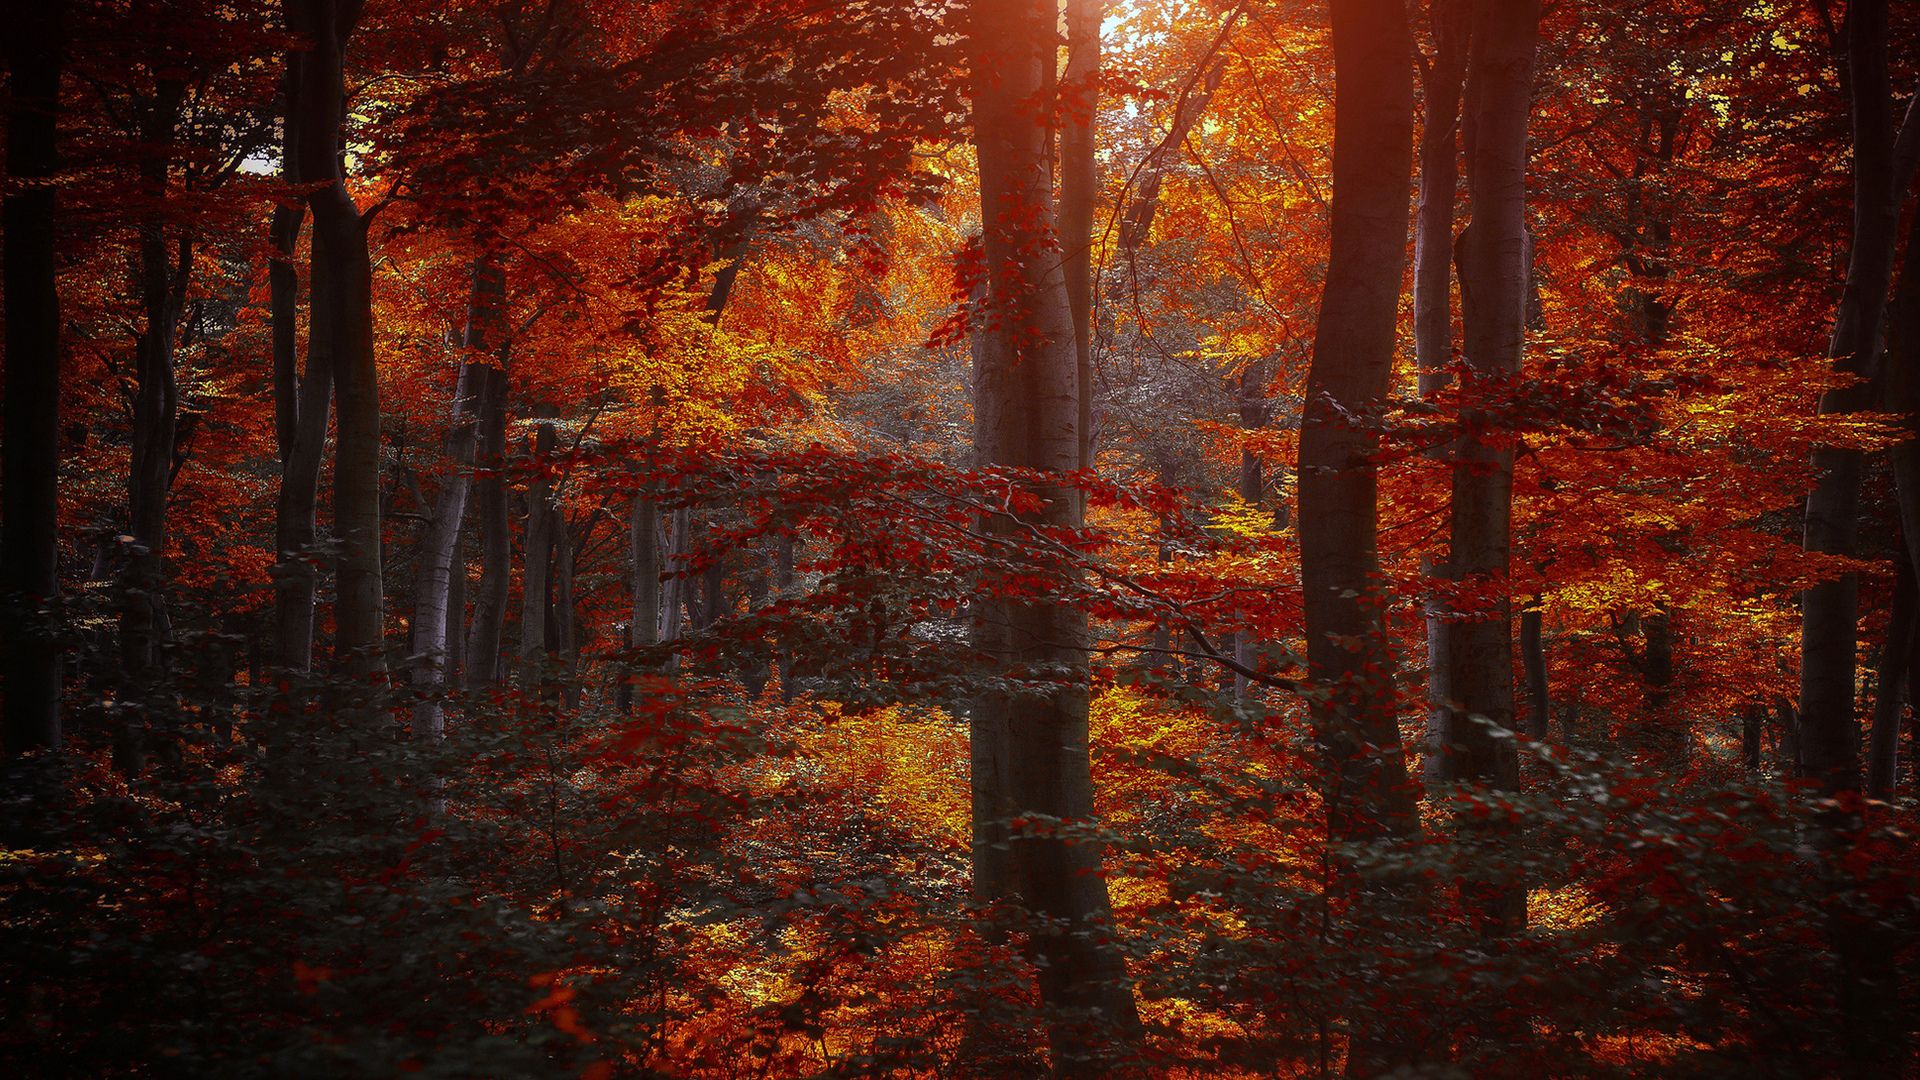 Sunlight shining through the trees in a forest during autumn - Crimson